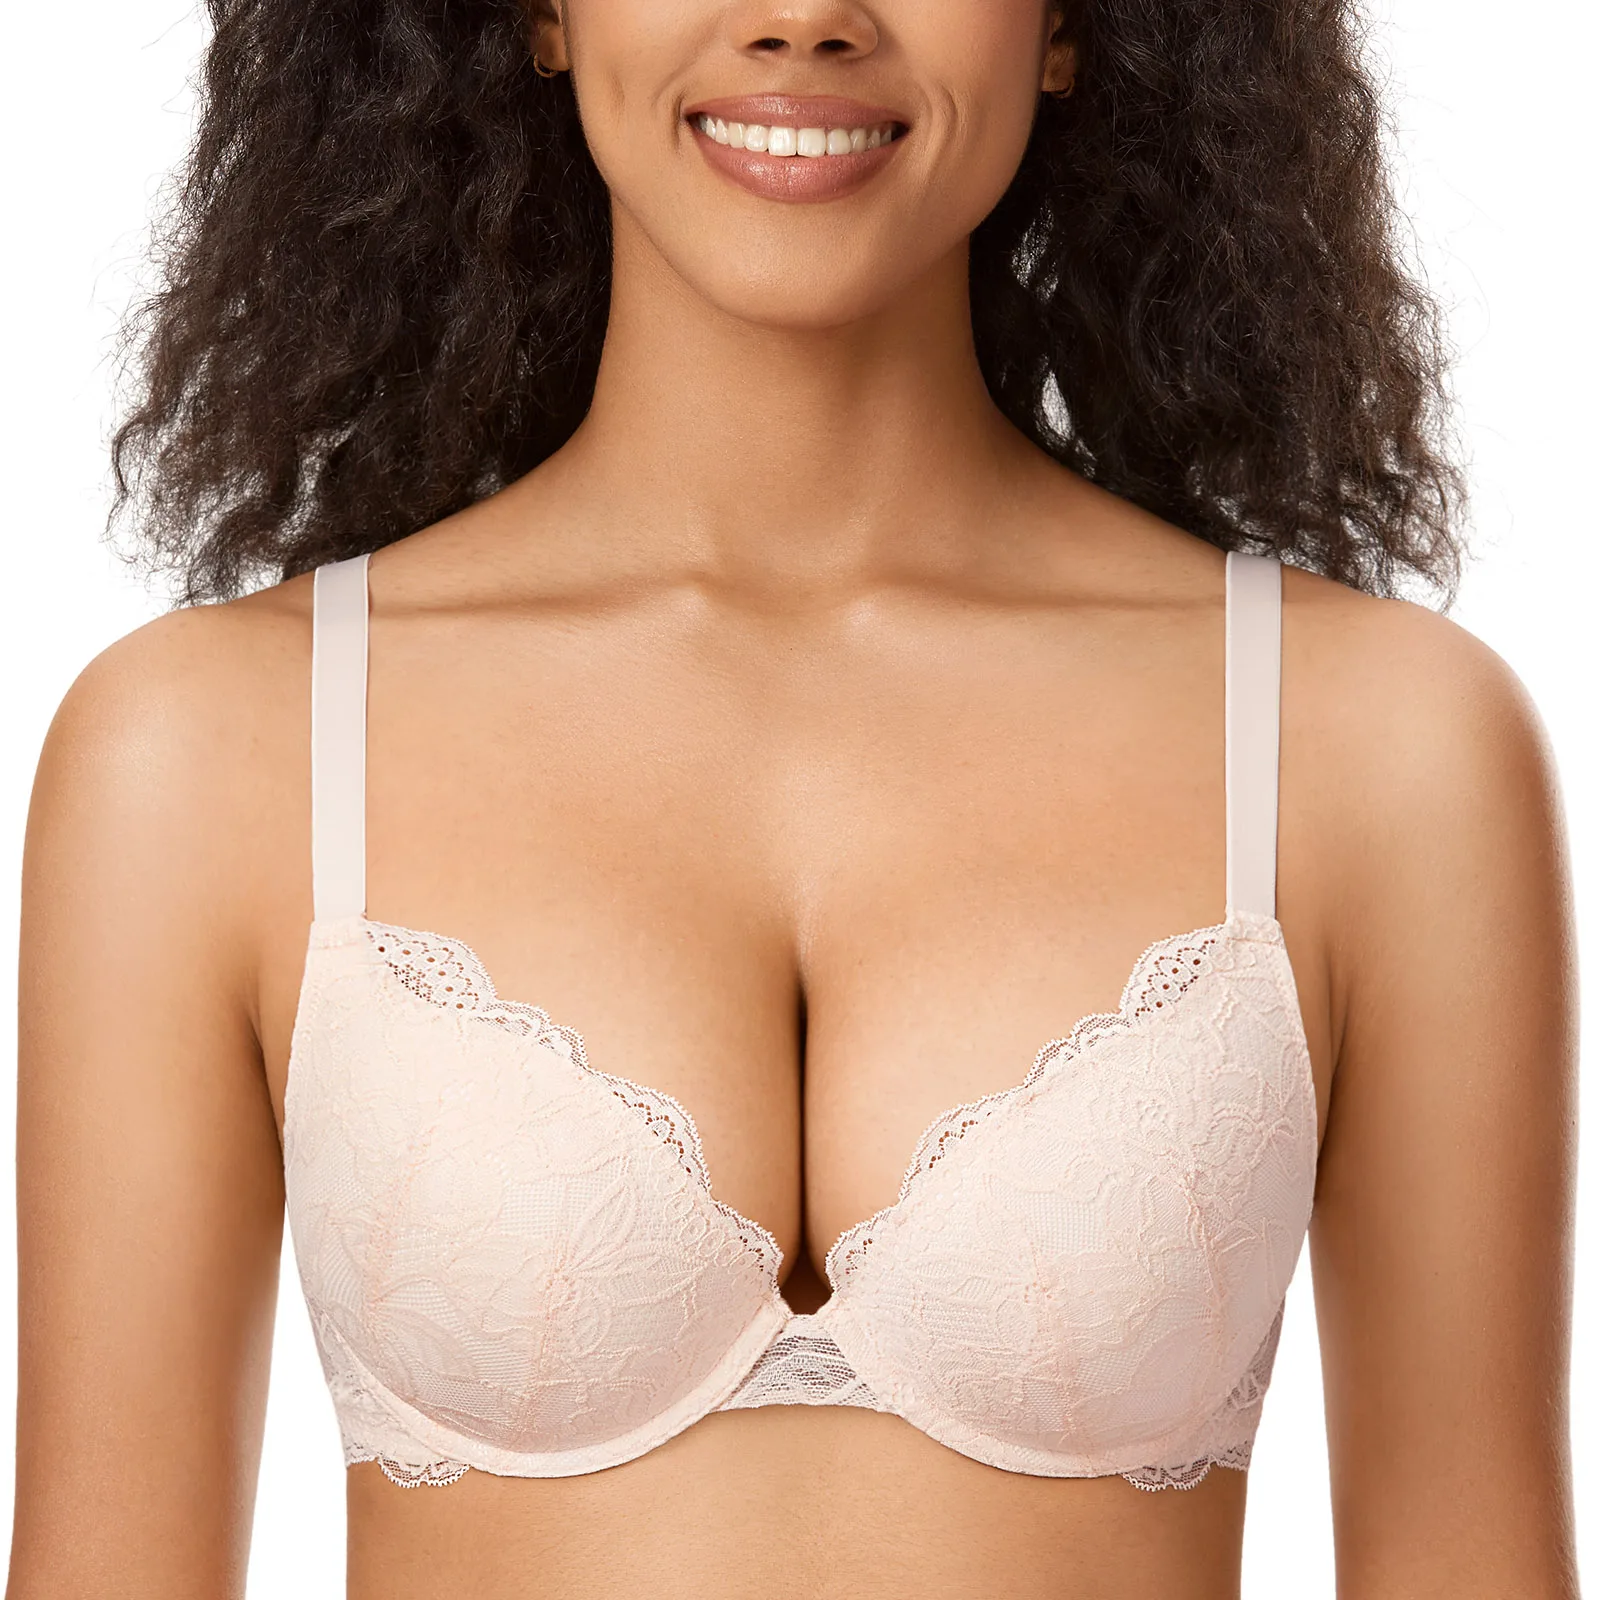 Padded T Shirt Bras for Women Ladies Bra Underwear Ultra-thin And  Adjustable Breathable Bra Transparent Underwire T-shirt Bra Padded  Bralettes for